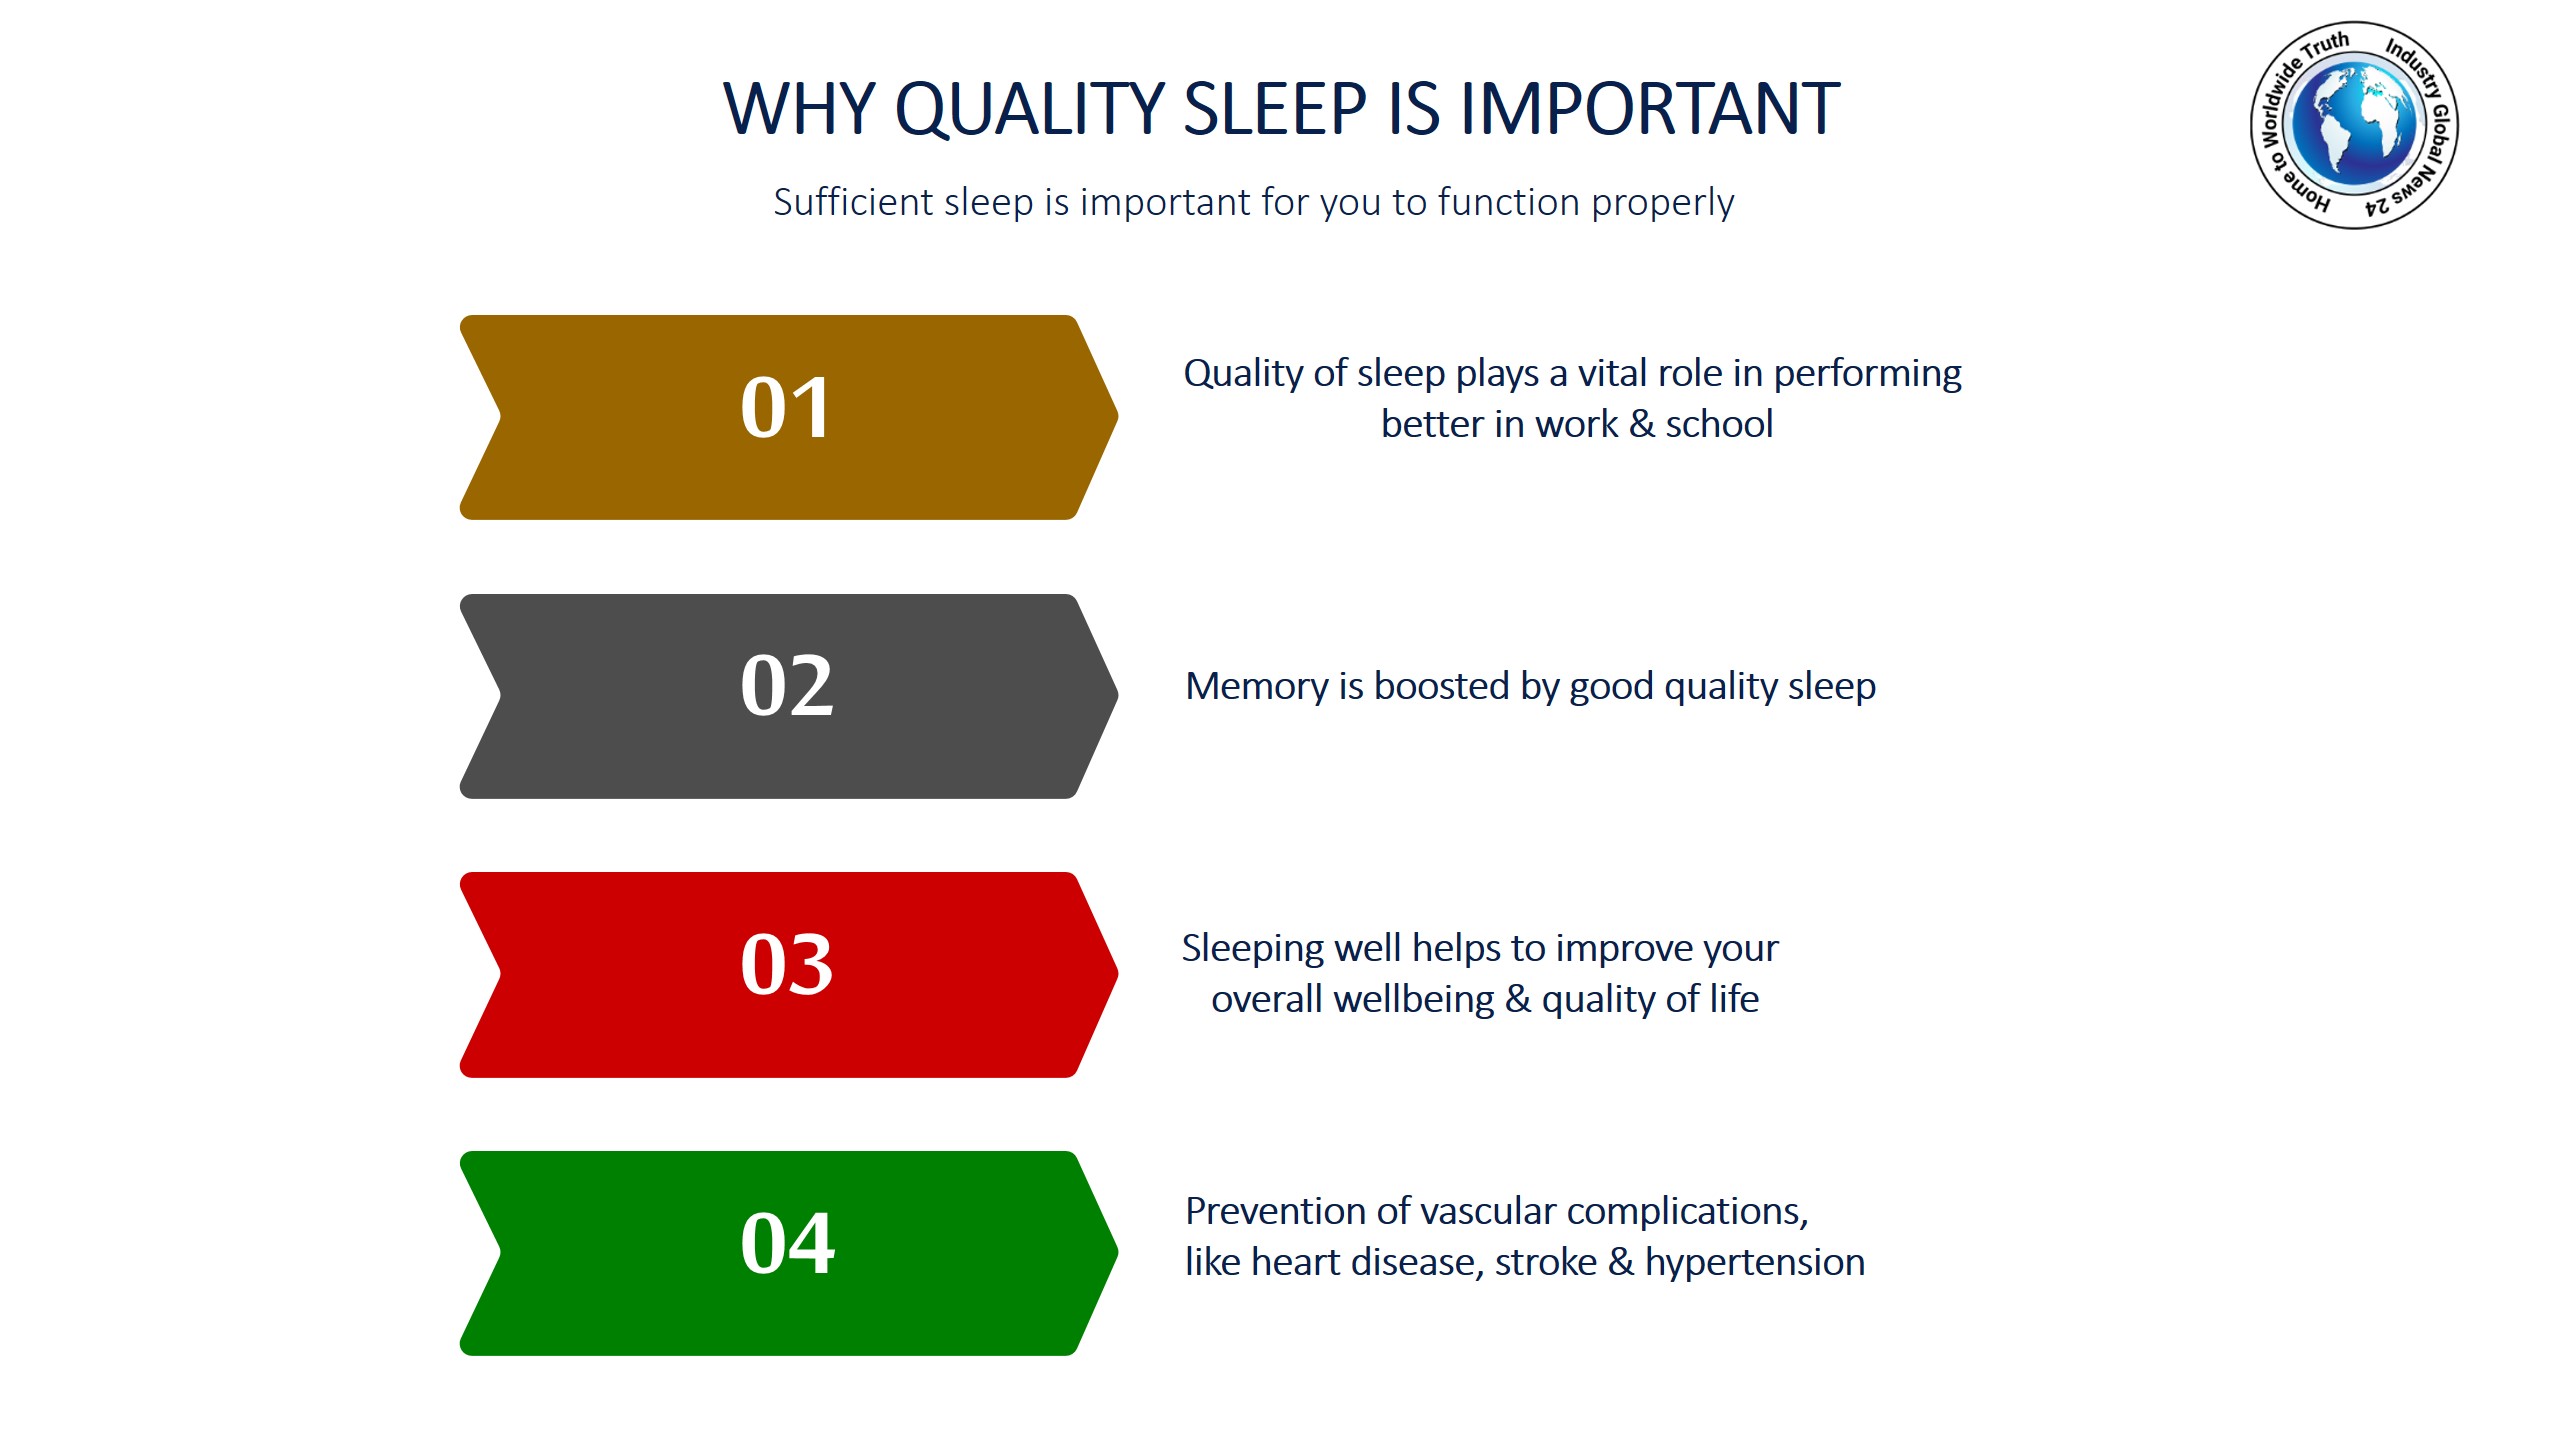 Why quality sleep is important